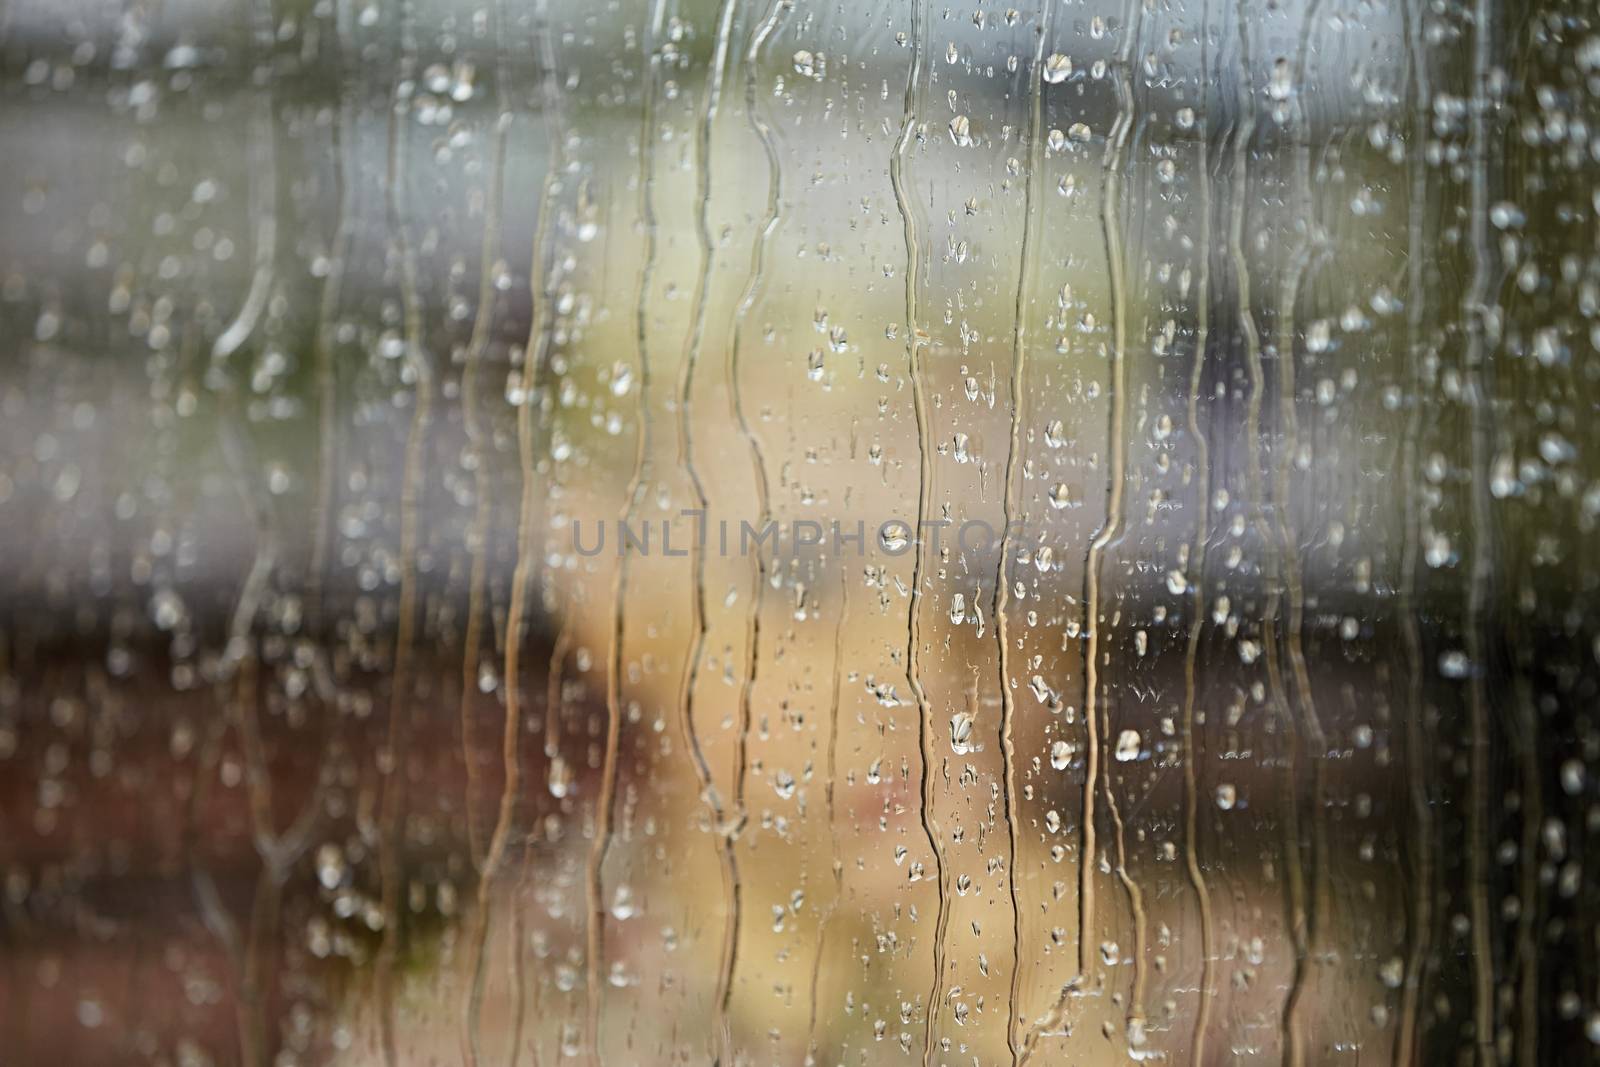 Little boy behind the window in the rain - selective focus